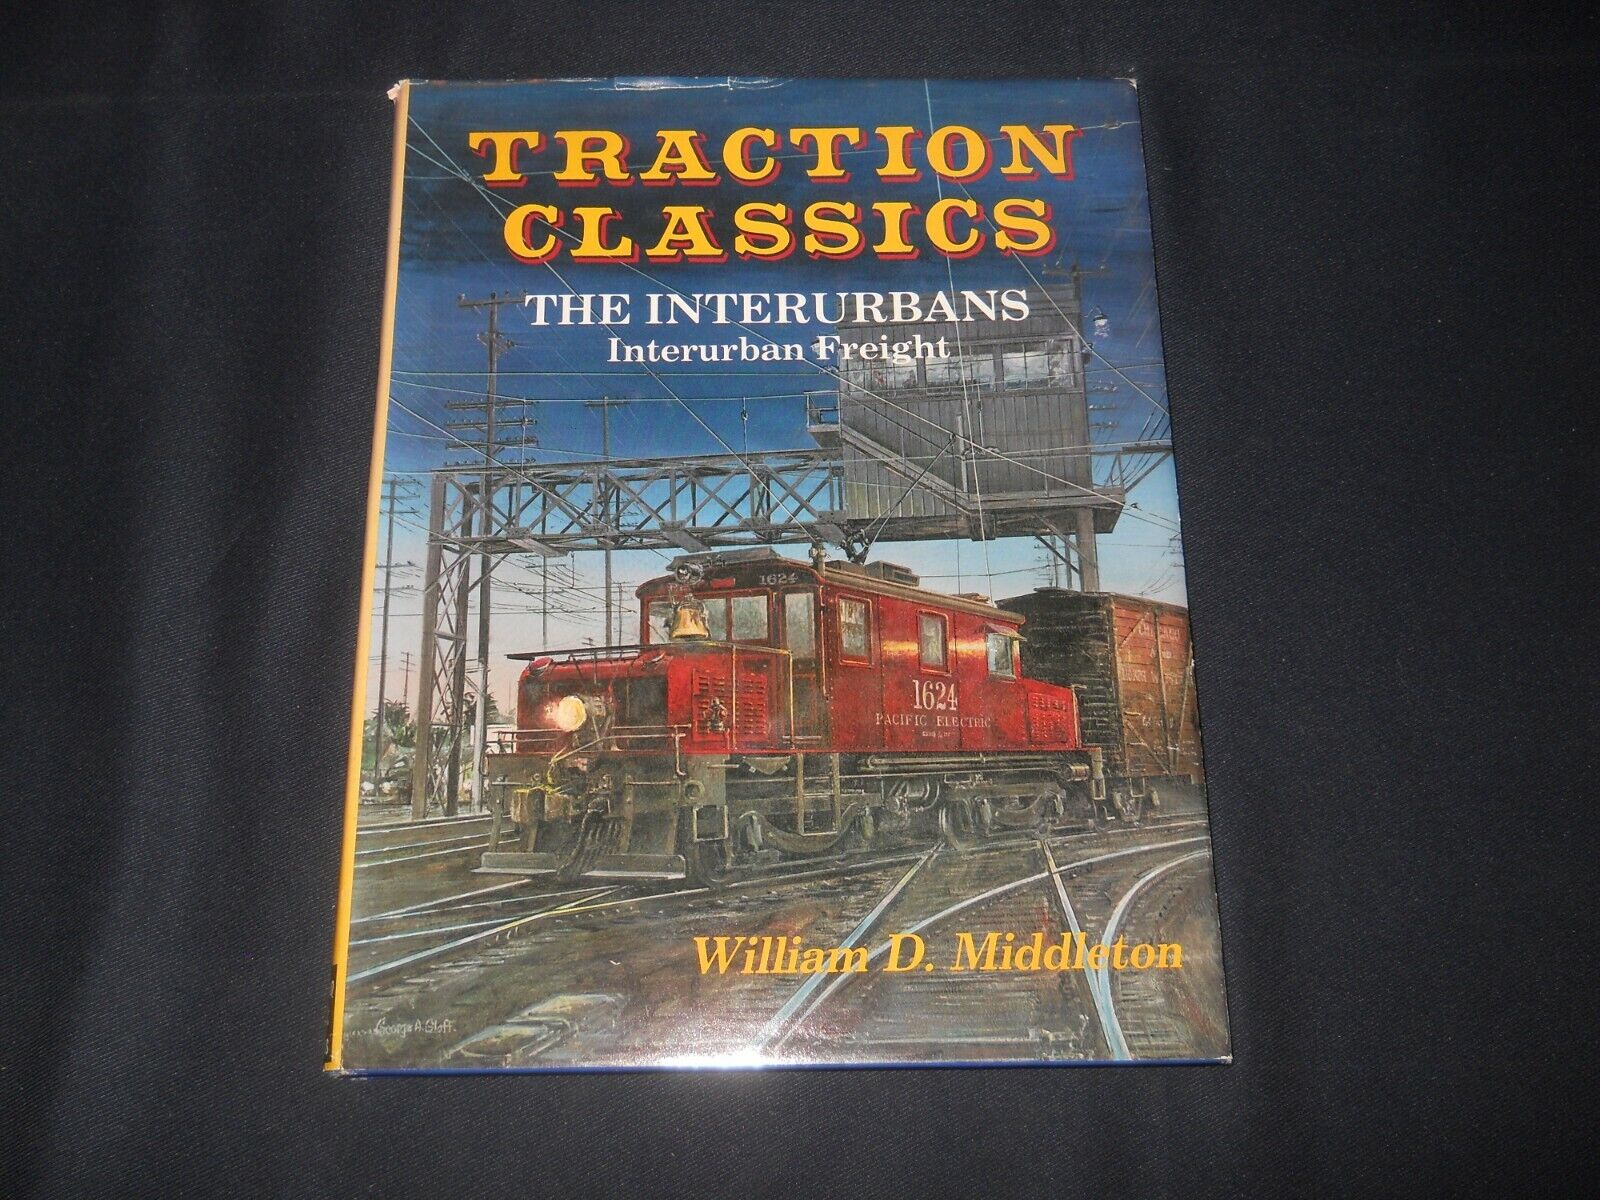 Traction Classics (Vol. 3): Interurban Freight by William D. Middleton